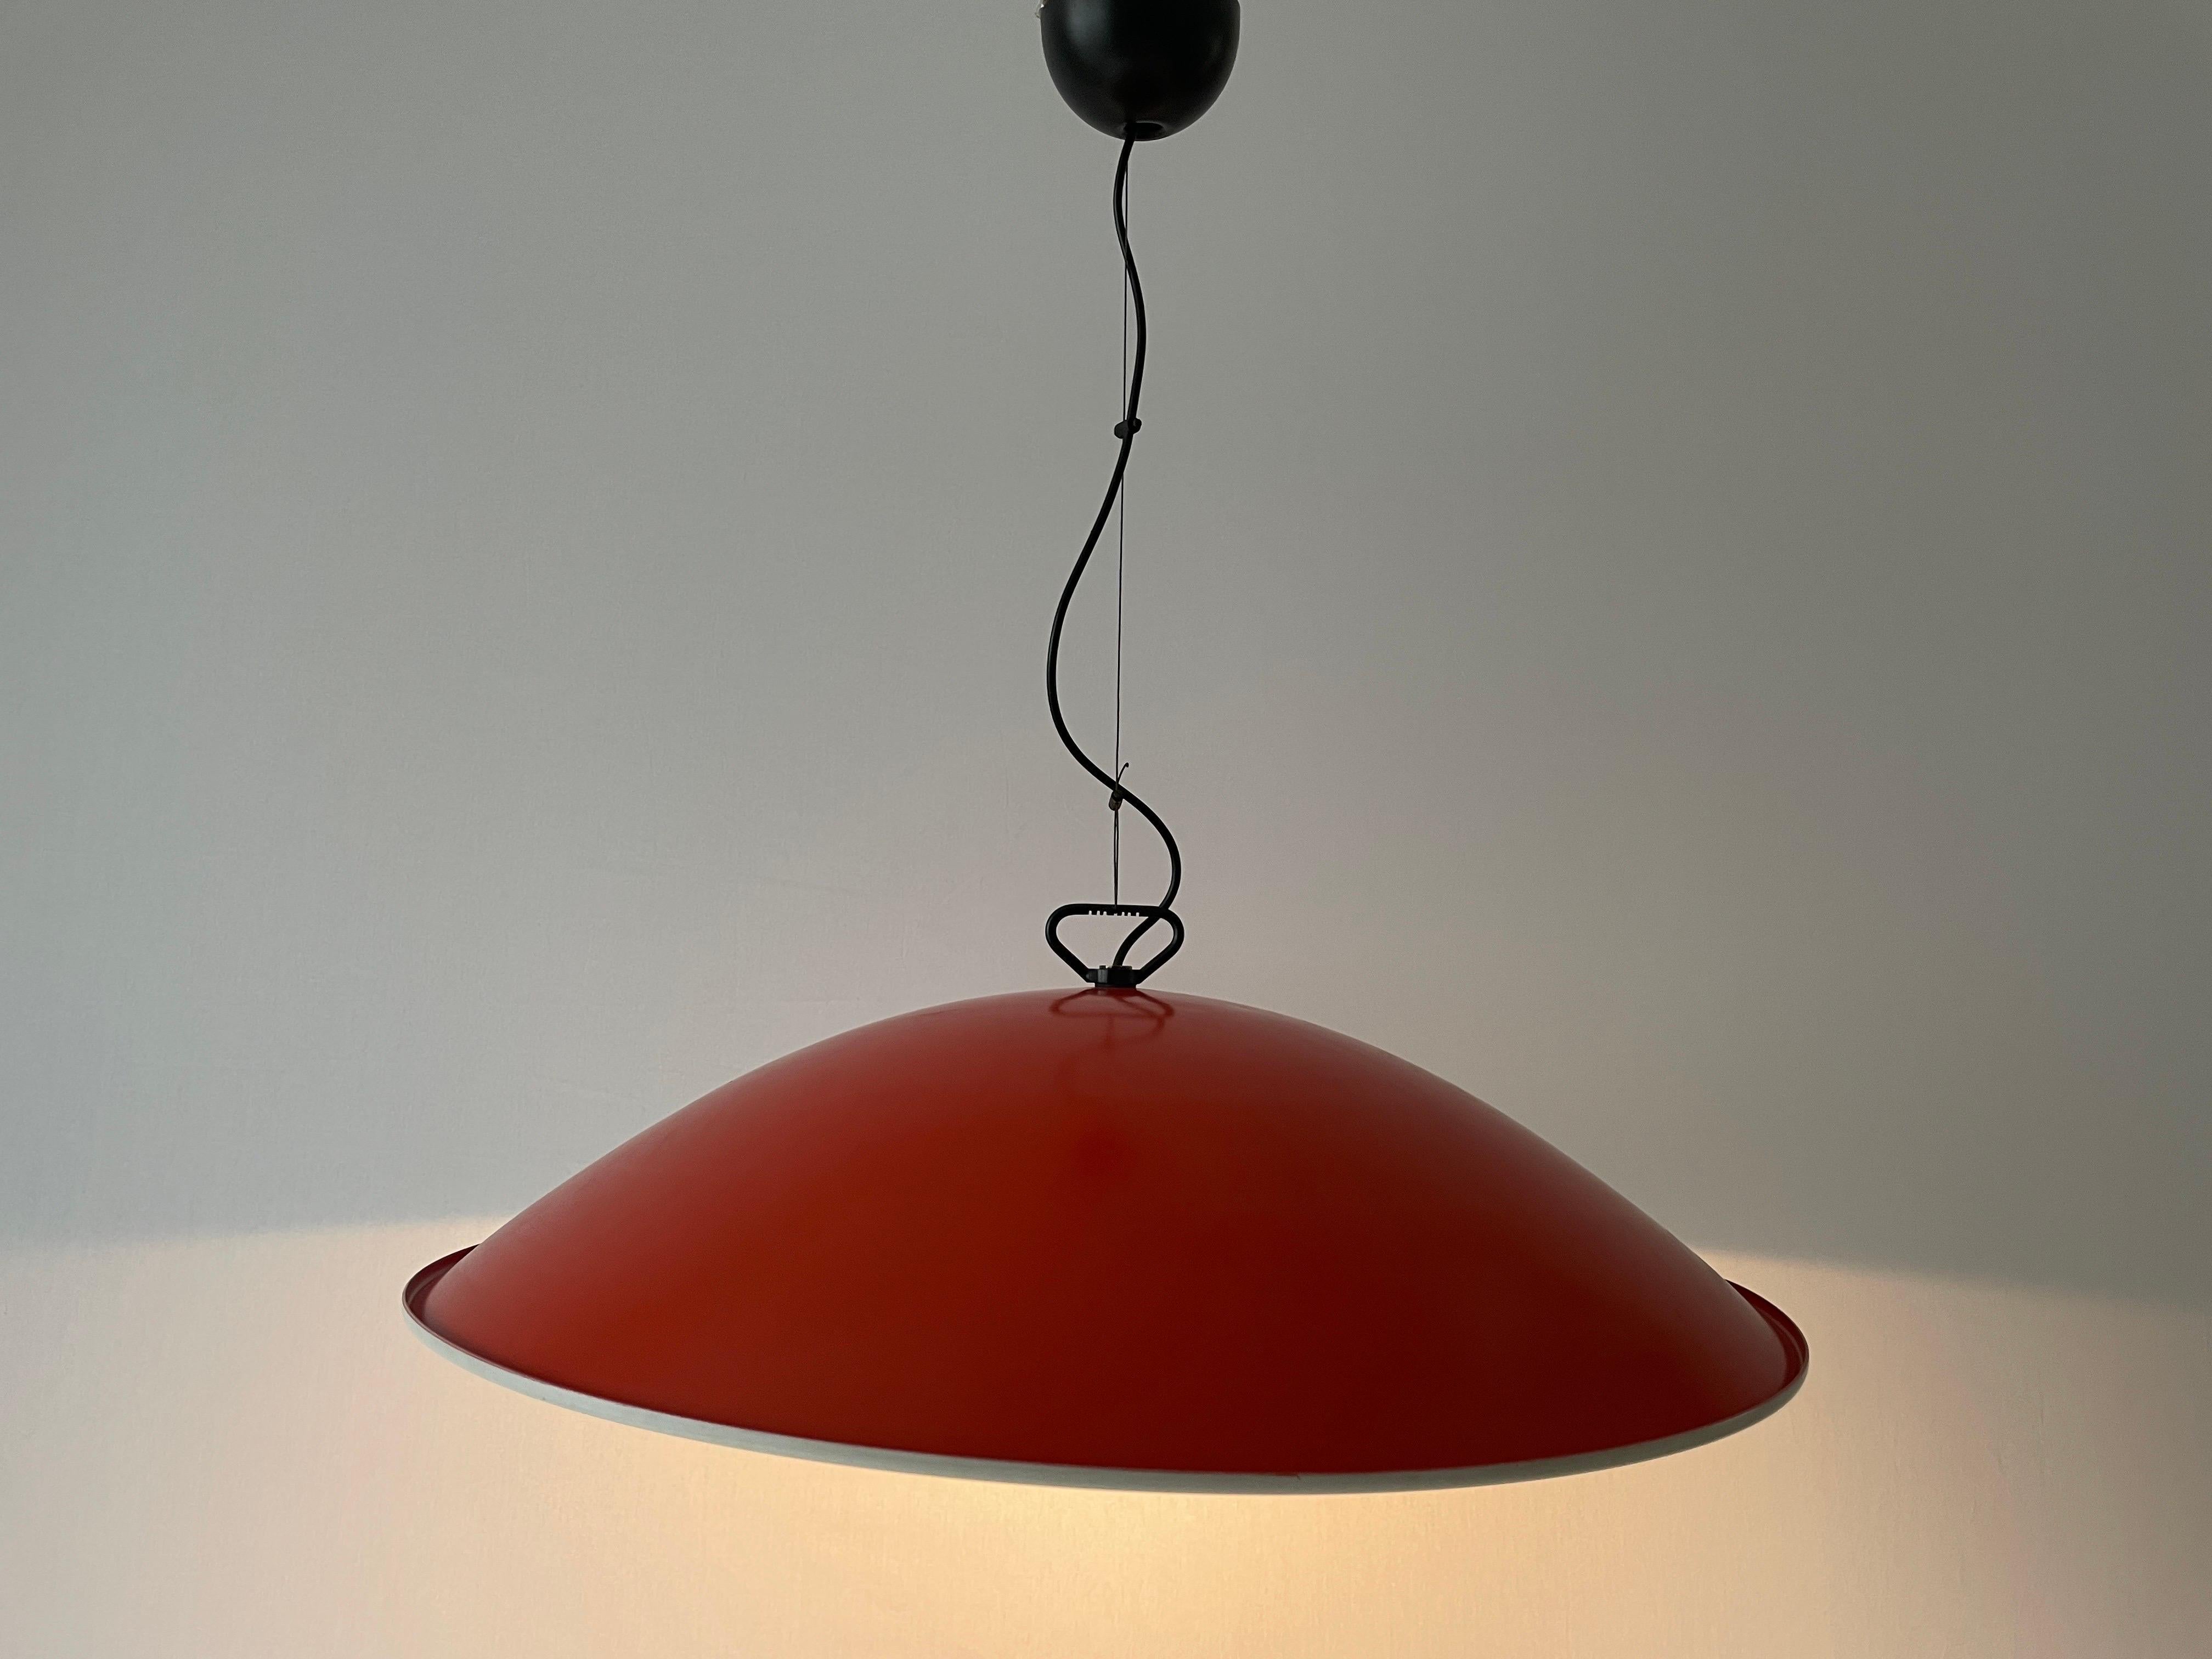 XXL Orange and White Metal Large Hotel Pendant Lamp, 1960s, Italy For Sale 11